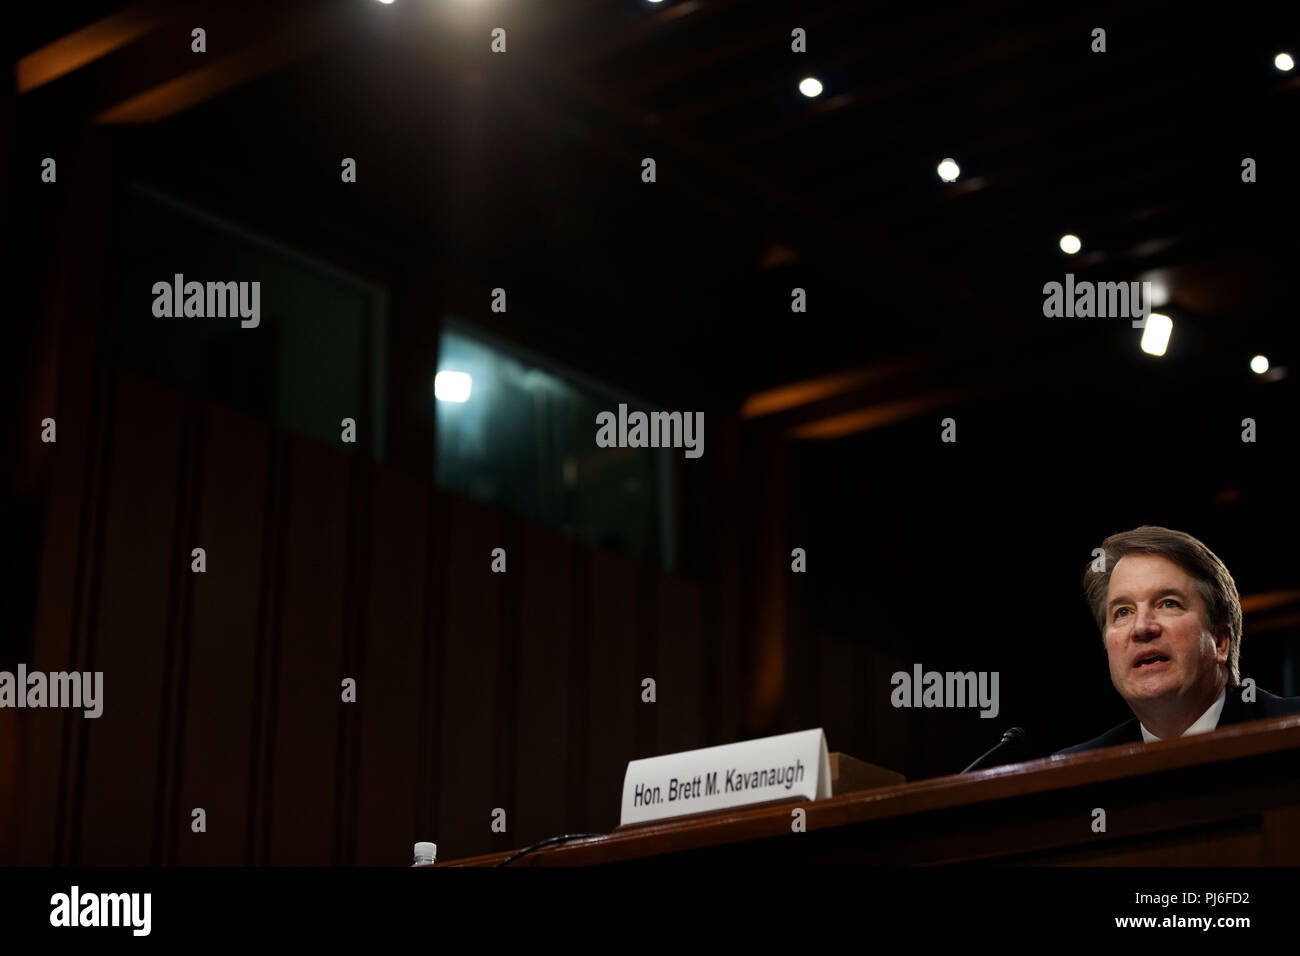 Washington, USA. 4th Sep, 2018. U.S. Supreme Court nominee Judge Brett Kavanaugh speaks during his Senate confirmation hearing on Capitol Hill in Washington, DC, the United States, Sept. 4, 2018. The Senate confirmation hearing for Kavanaugh began Tuesday, which has descended into chaos as Democrats protested about Republicans blocking access to documents concerning the judge. Credit: Ting Shen/Xinhua/Alamy Live News Stock Photo